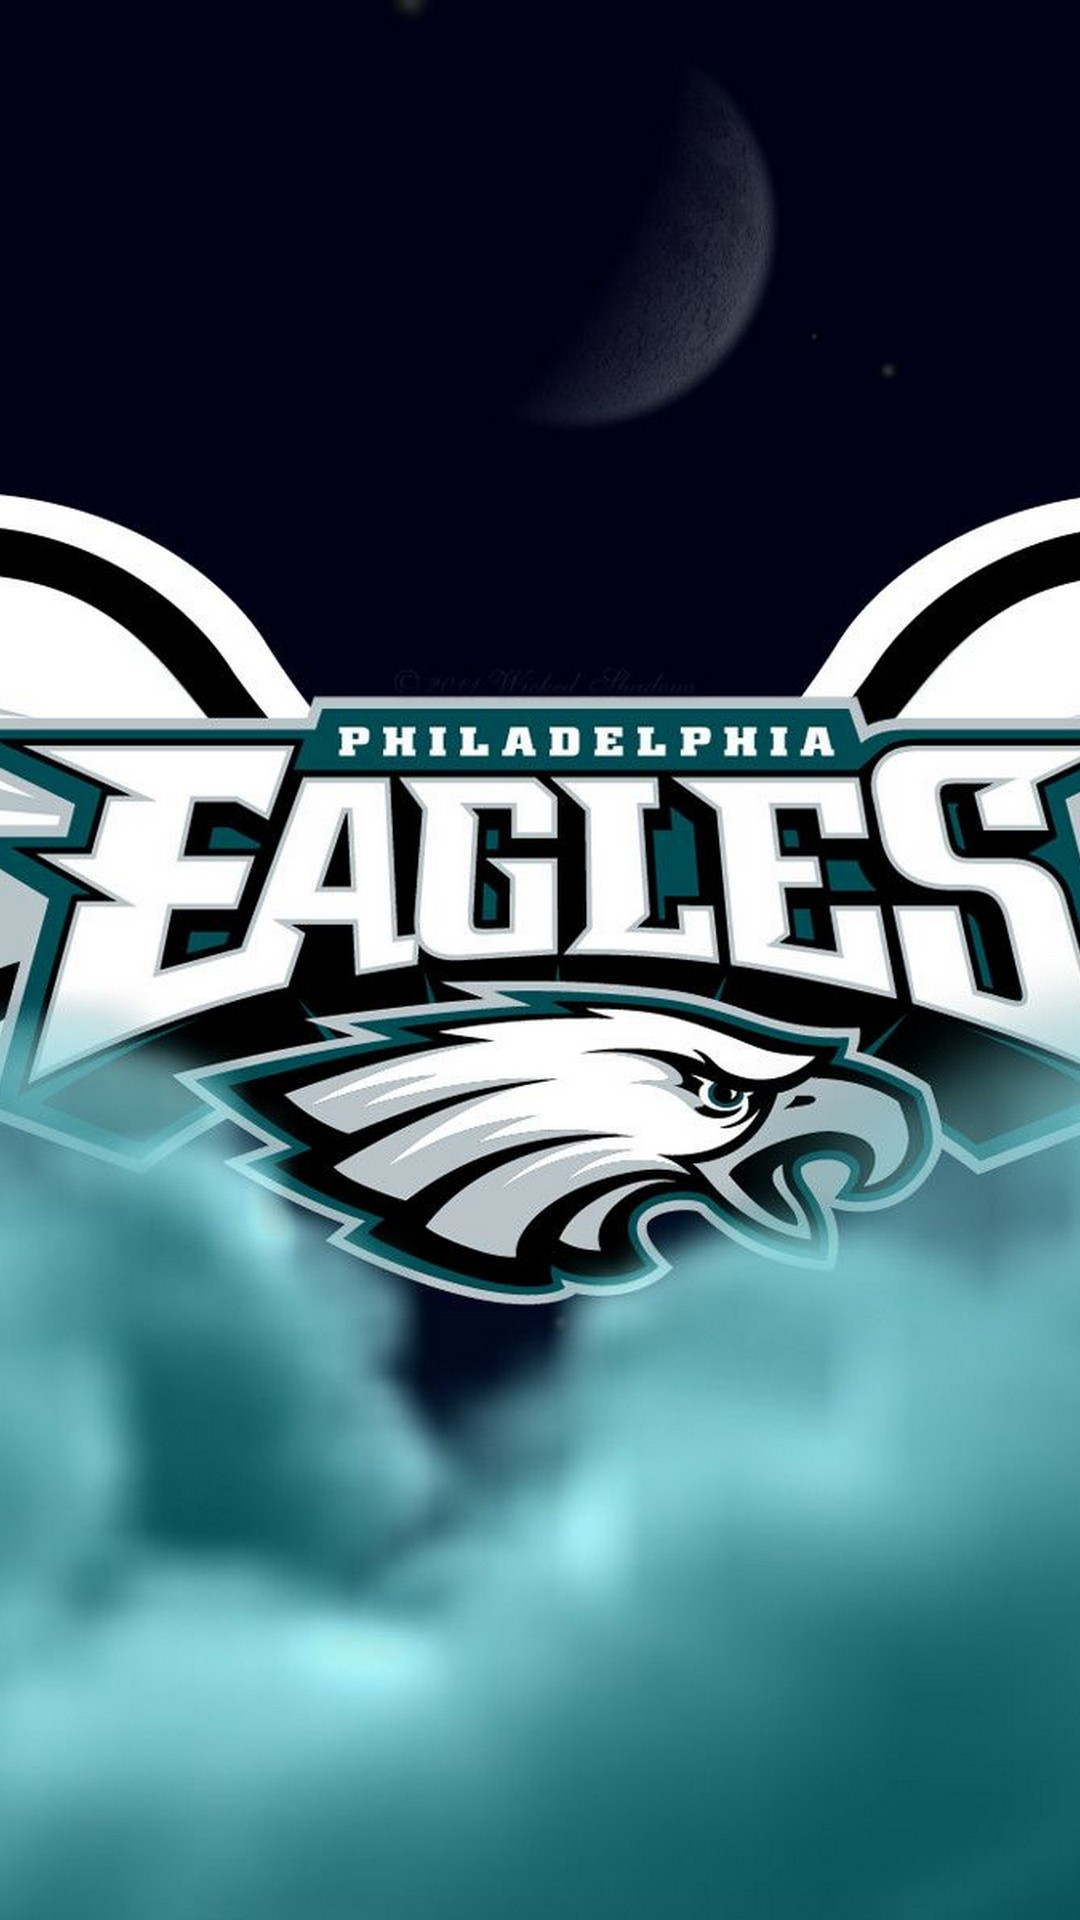 Philadelphia Eagles iPhone Screen Wallpaper With high-resolution 1080X1920 pixel. Donwload and set as wallpaper for your iPhone X, iPhone XS home screen backgrounds, XS Max, XR, iPhone8 lock screen wallpaper, iPhone 7, 6, SE, and other mobile devices